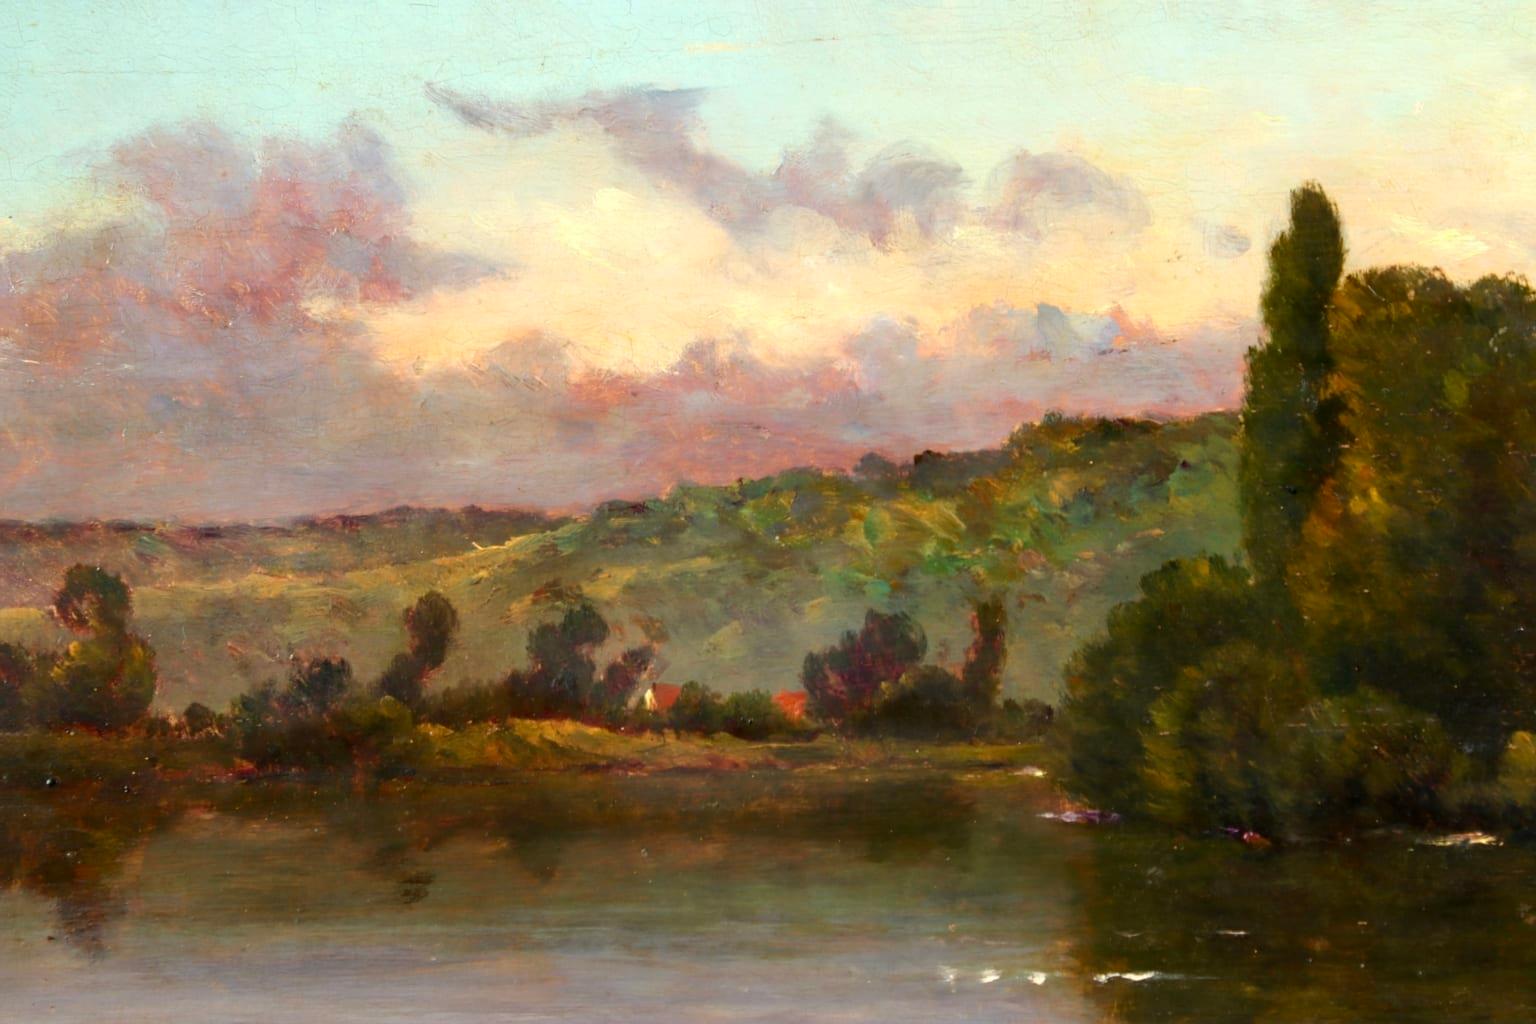 On the Seine - Barbizon Oil, Figures on River in Landscape by Hippolyte Delpy - Barbizon School Painting by Hippolyte Camille Delpy